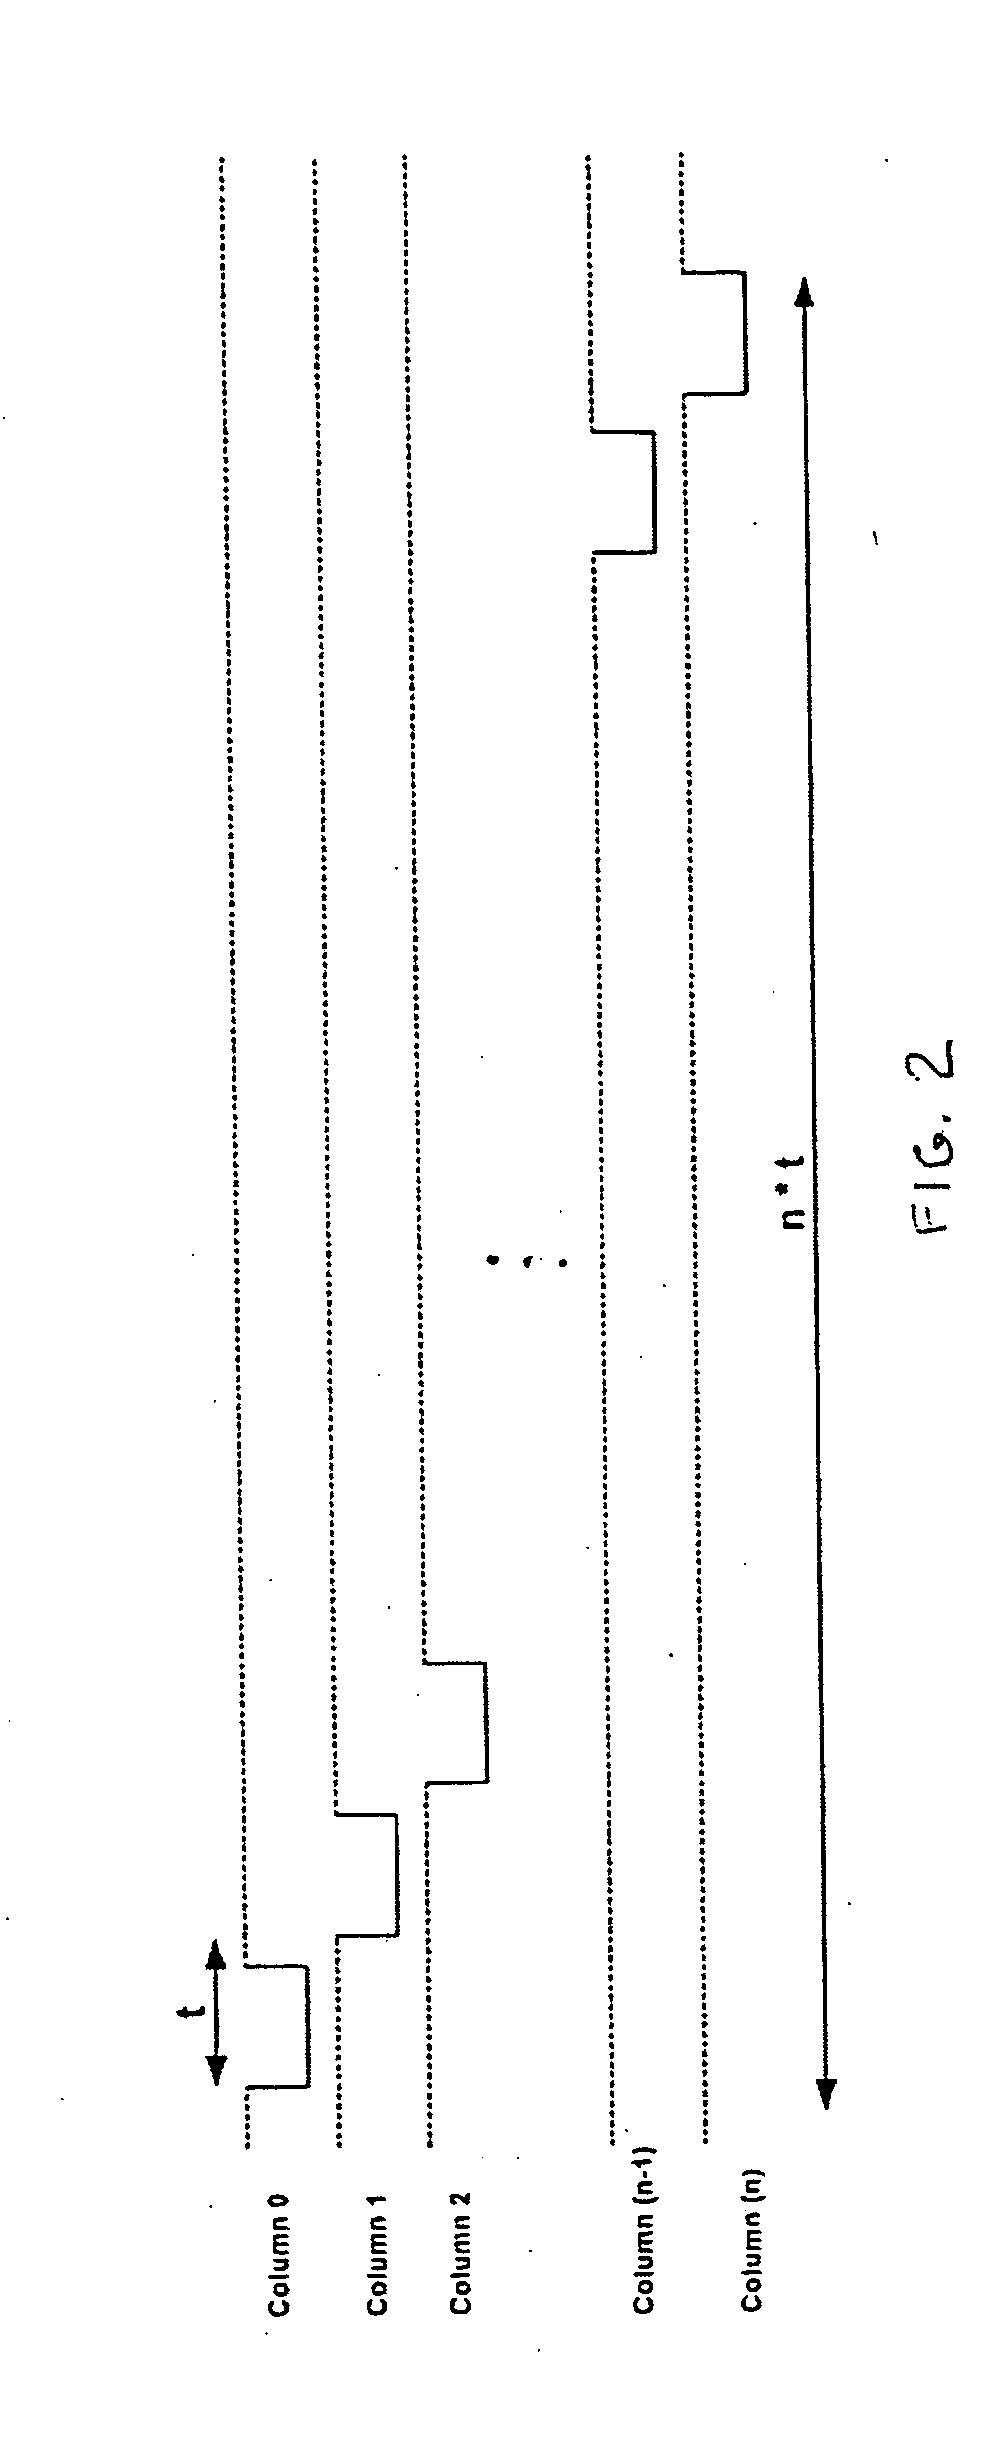 Method and apparatus for scanning a key or button matrix